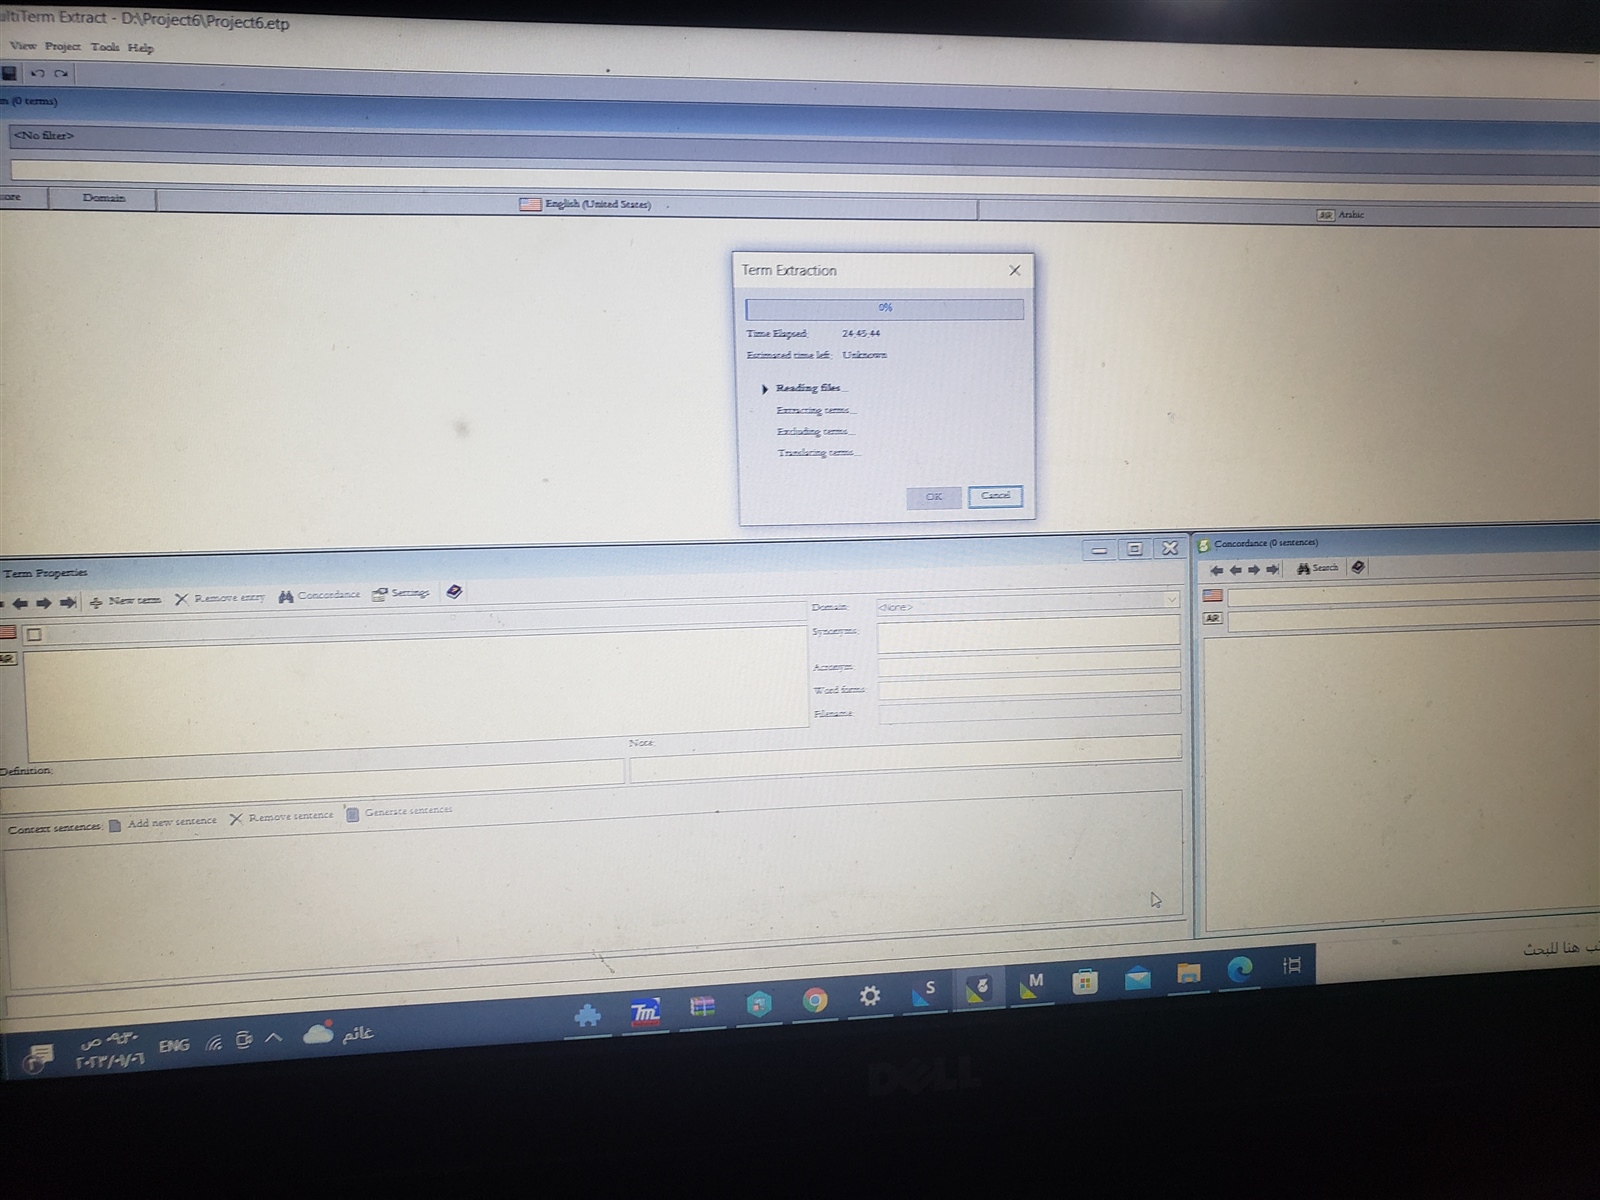 Screenshot of Trados Studio with Term Extraction window open, showing 95% progress and a status message 'Indexing terms...'. The Estimated End Time is unknown.